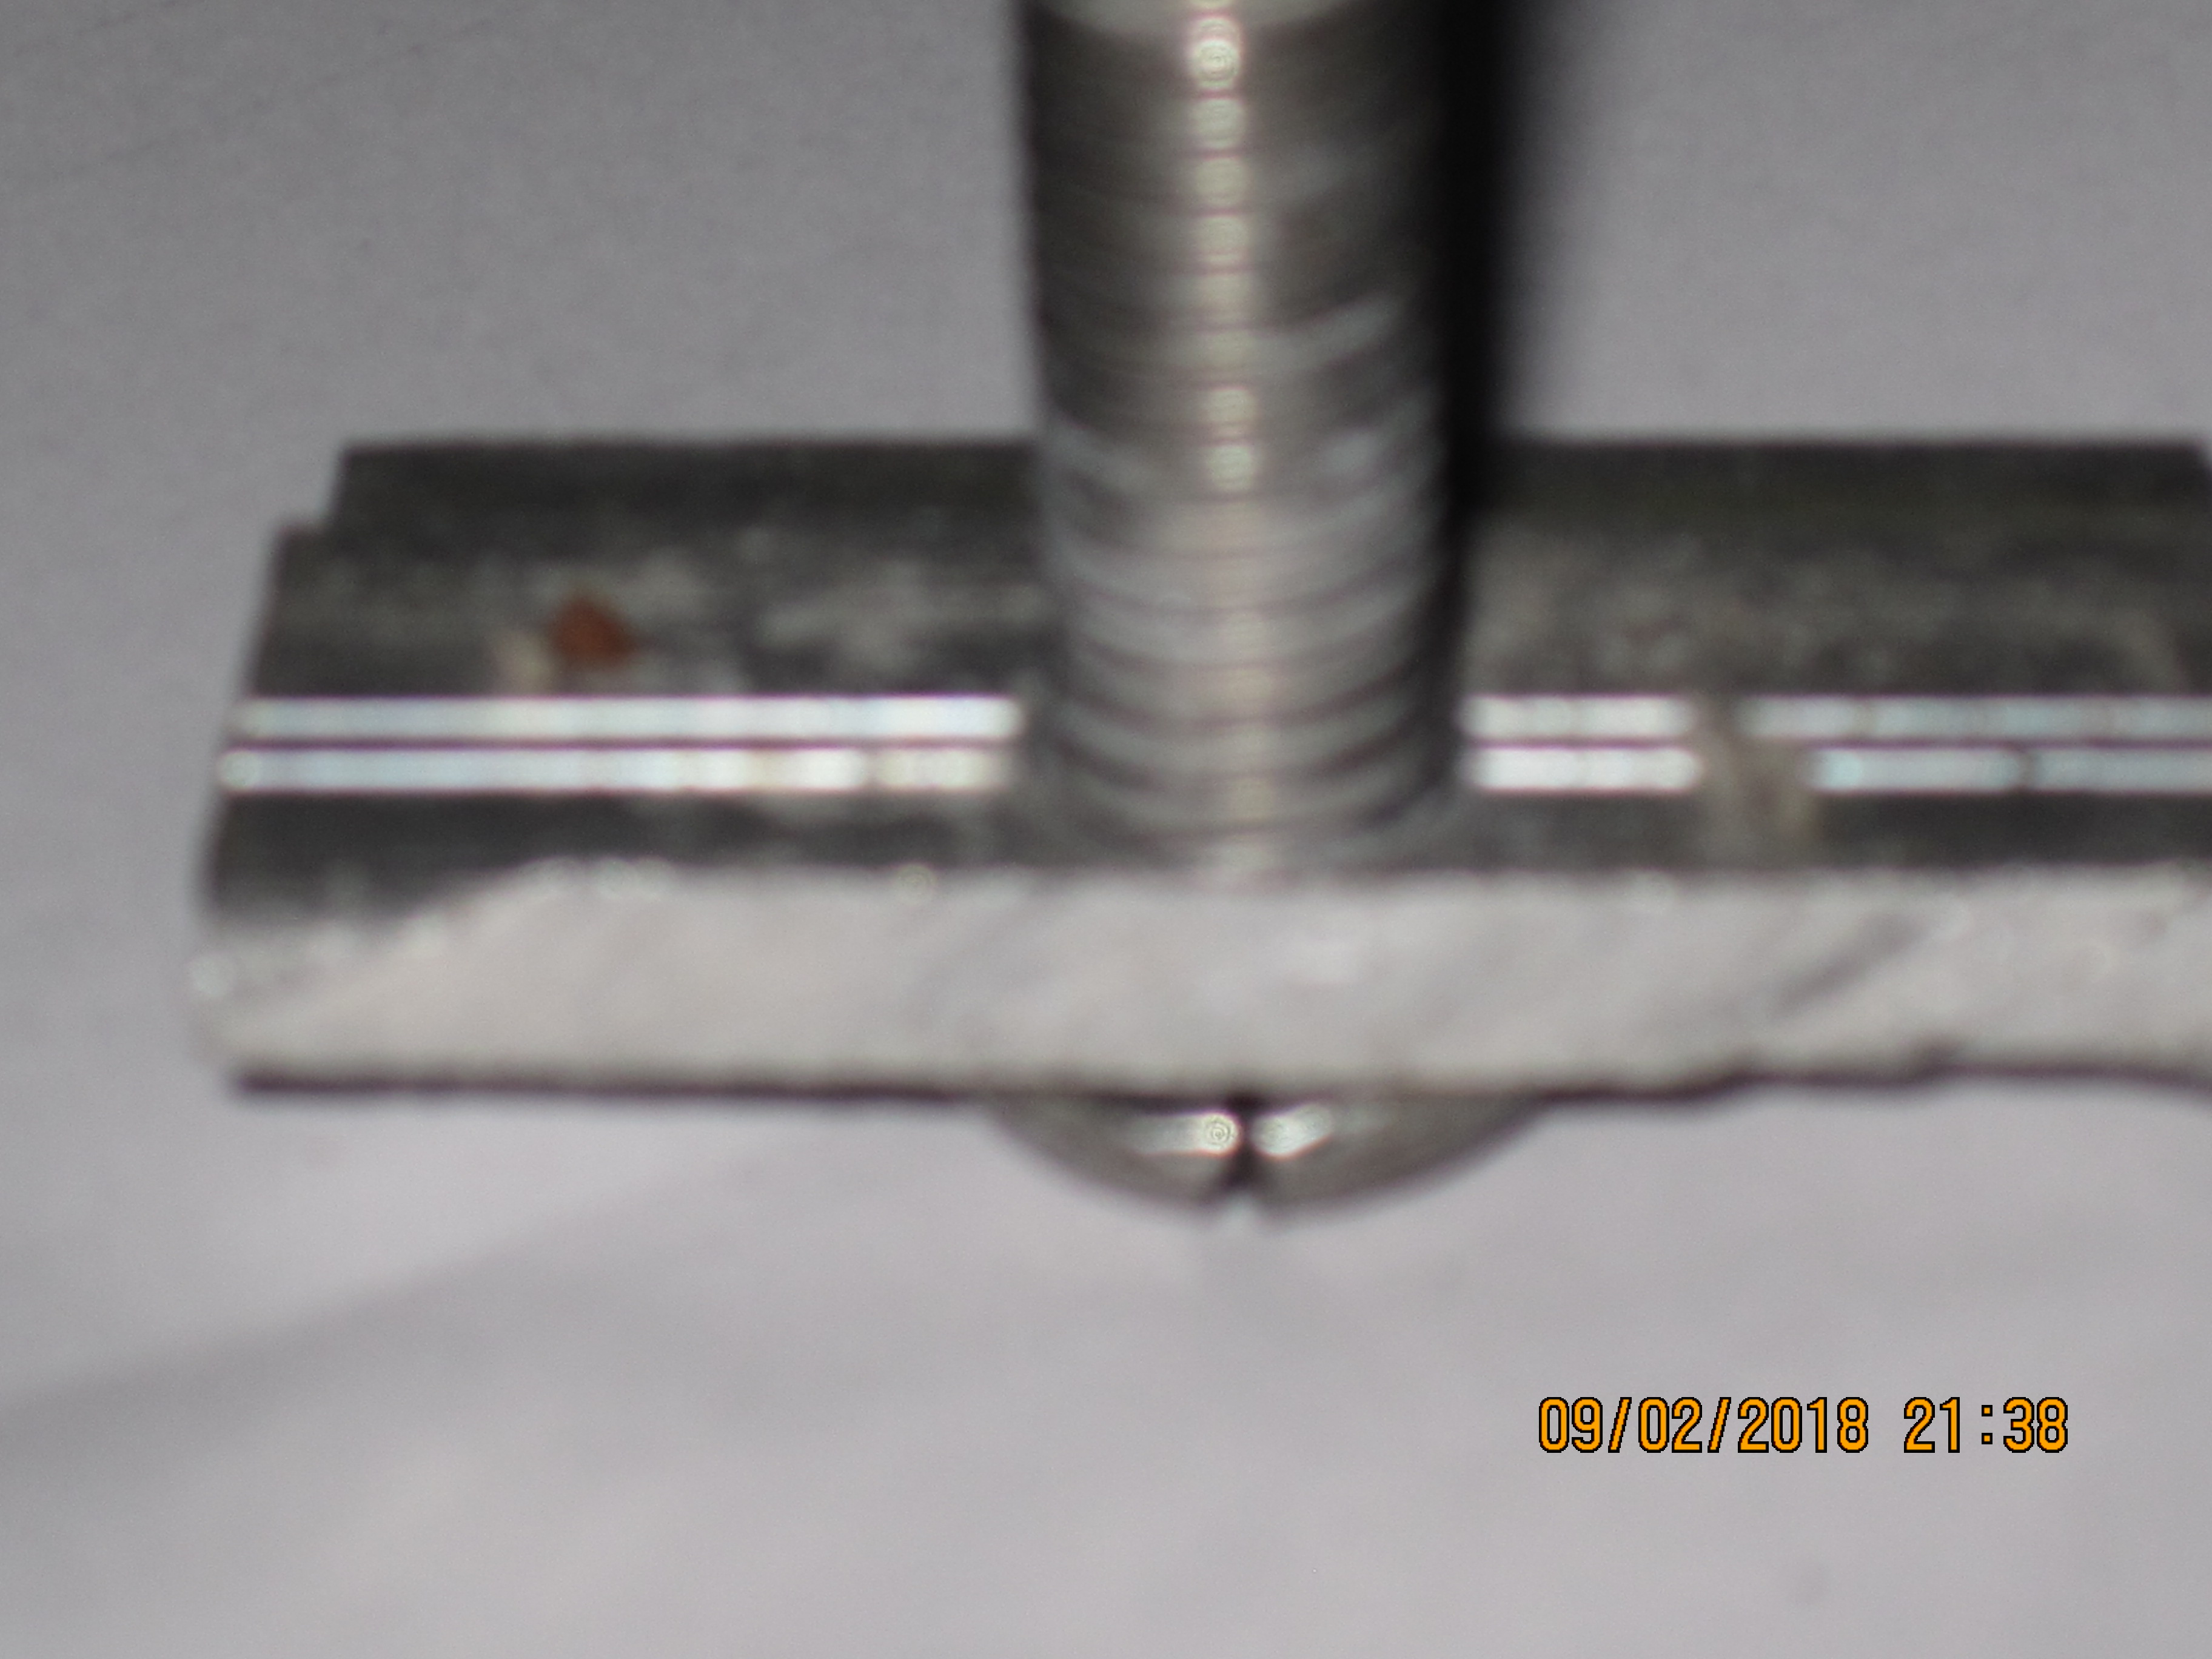 Name that mounting Clamp faulty pv clamp 003.JPG - EletriciansForums.net